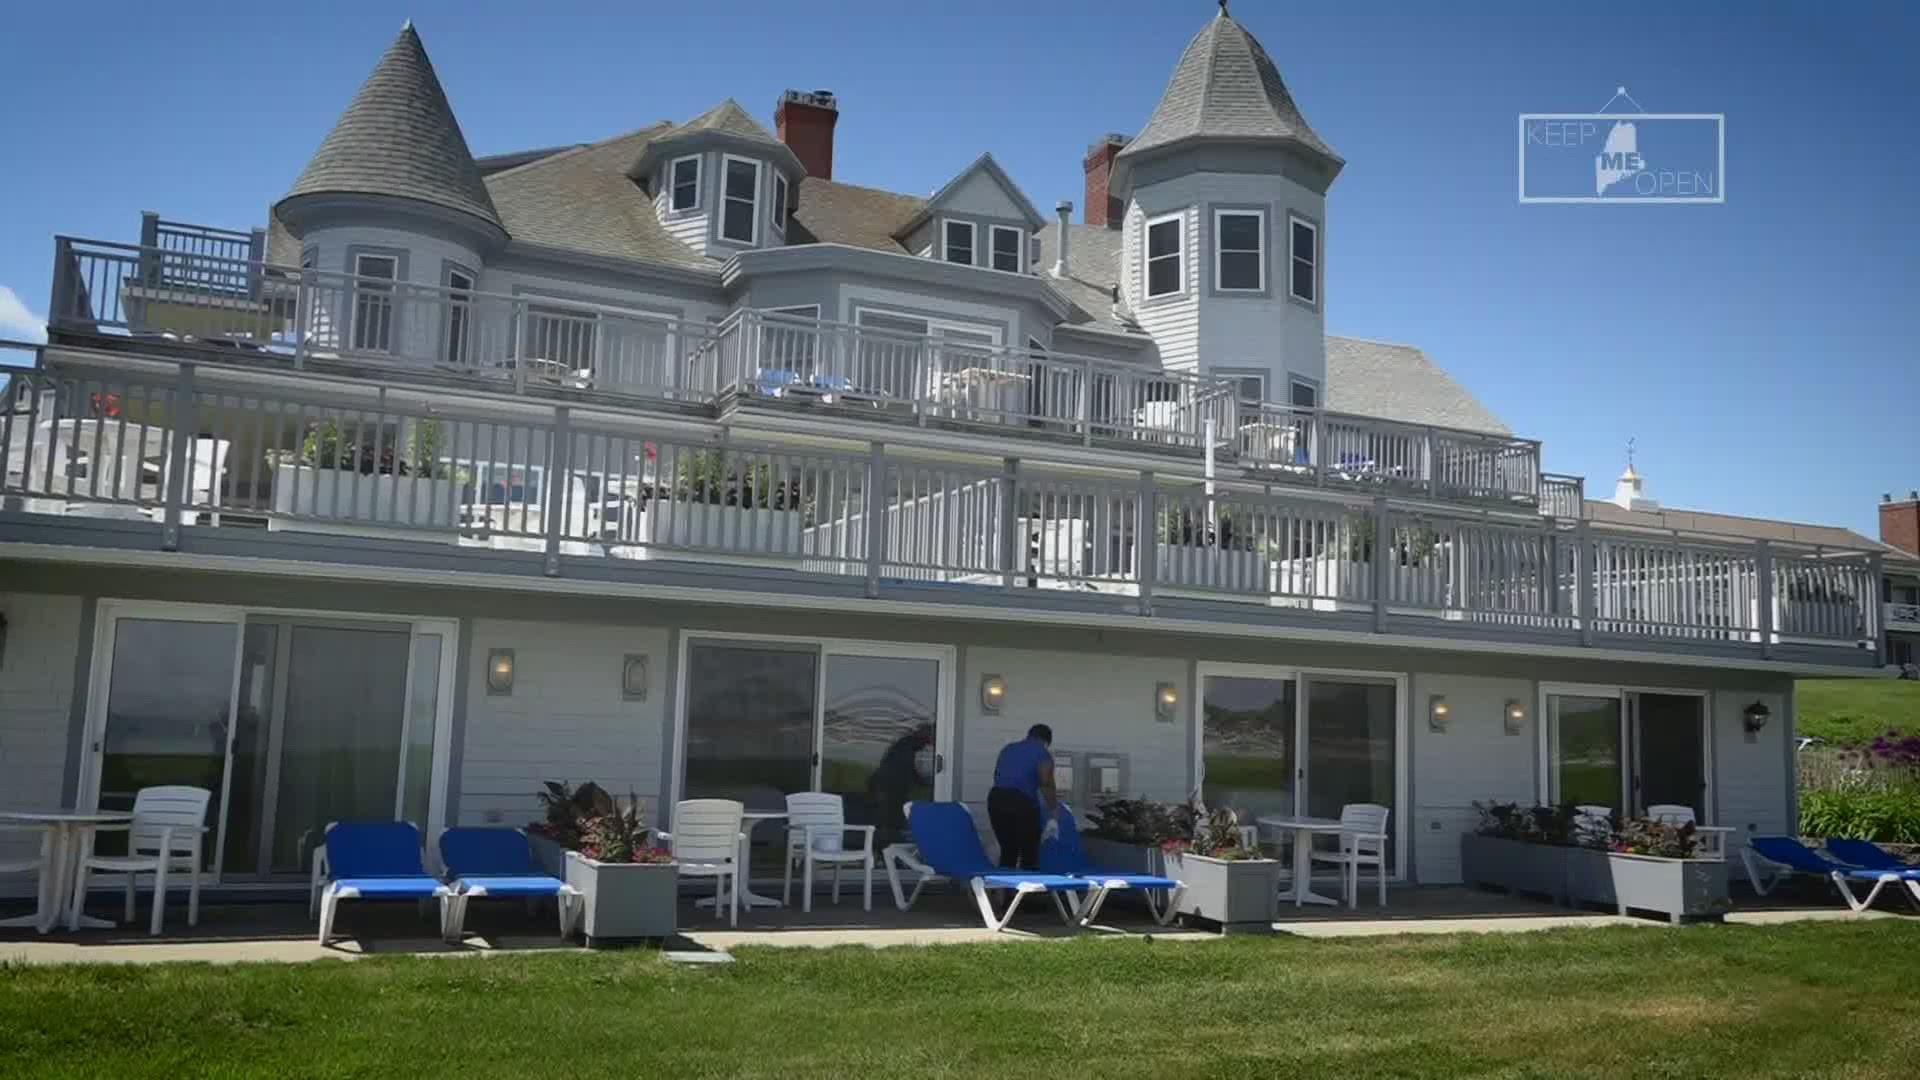 From cutting rates to adjusting practices, the owners of Ogunquit's Beachmere Inn say there is always hope the business will return